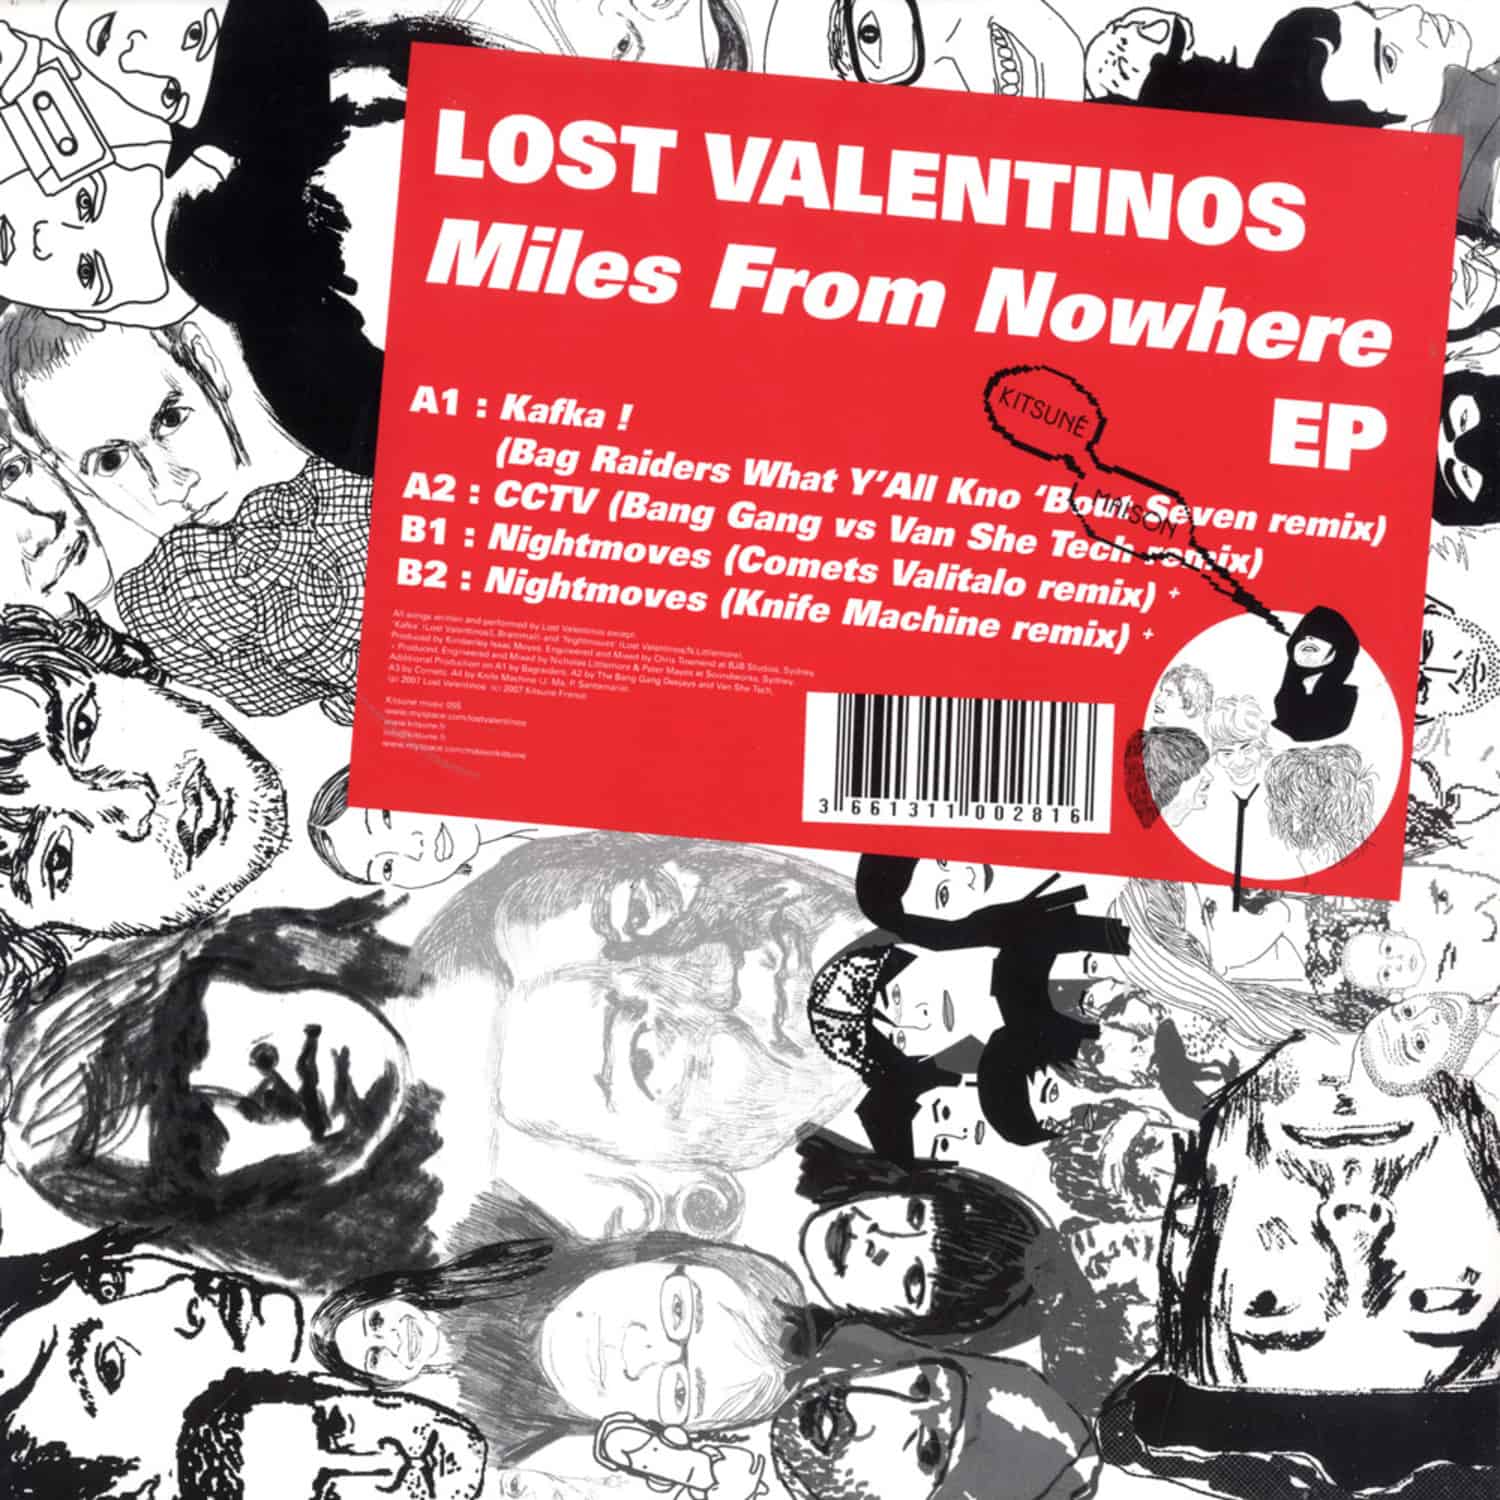 Los Valentinos - MILES FROM NOWHERE EP